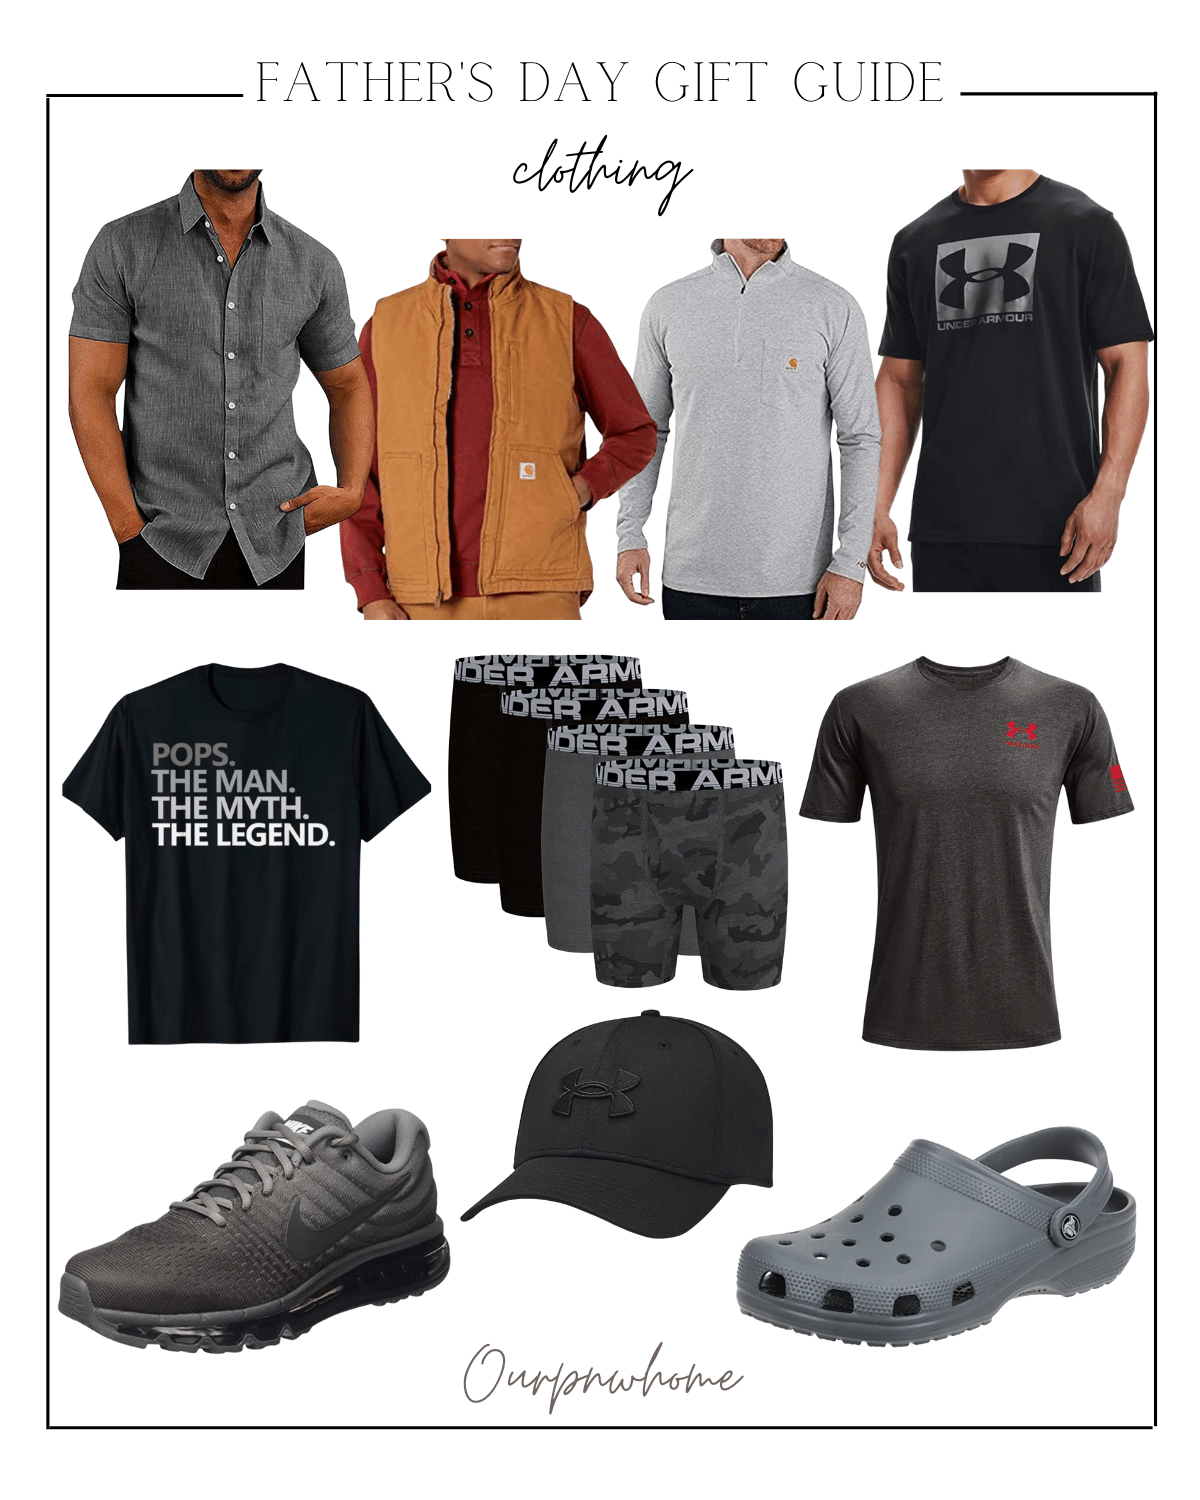 fathers day gift ideas, fathers day gift guide, clothing, amazon fashion, tshirts, shoes, sneakers, crocs, underwear, hats, dress shirts 